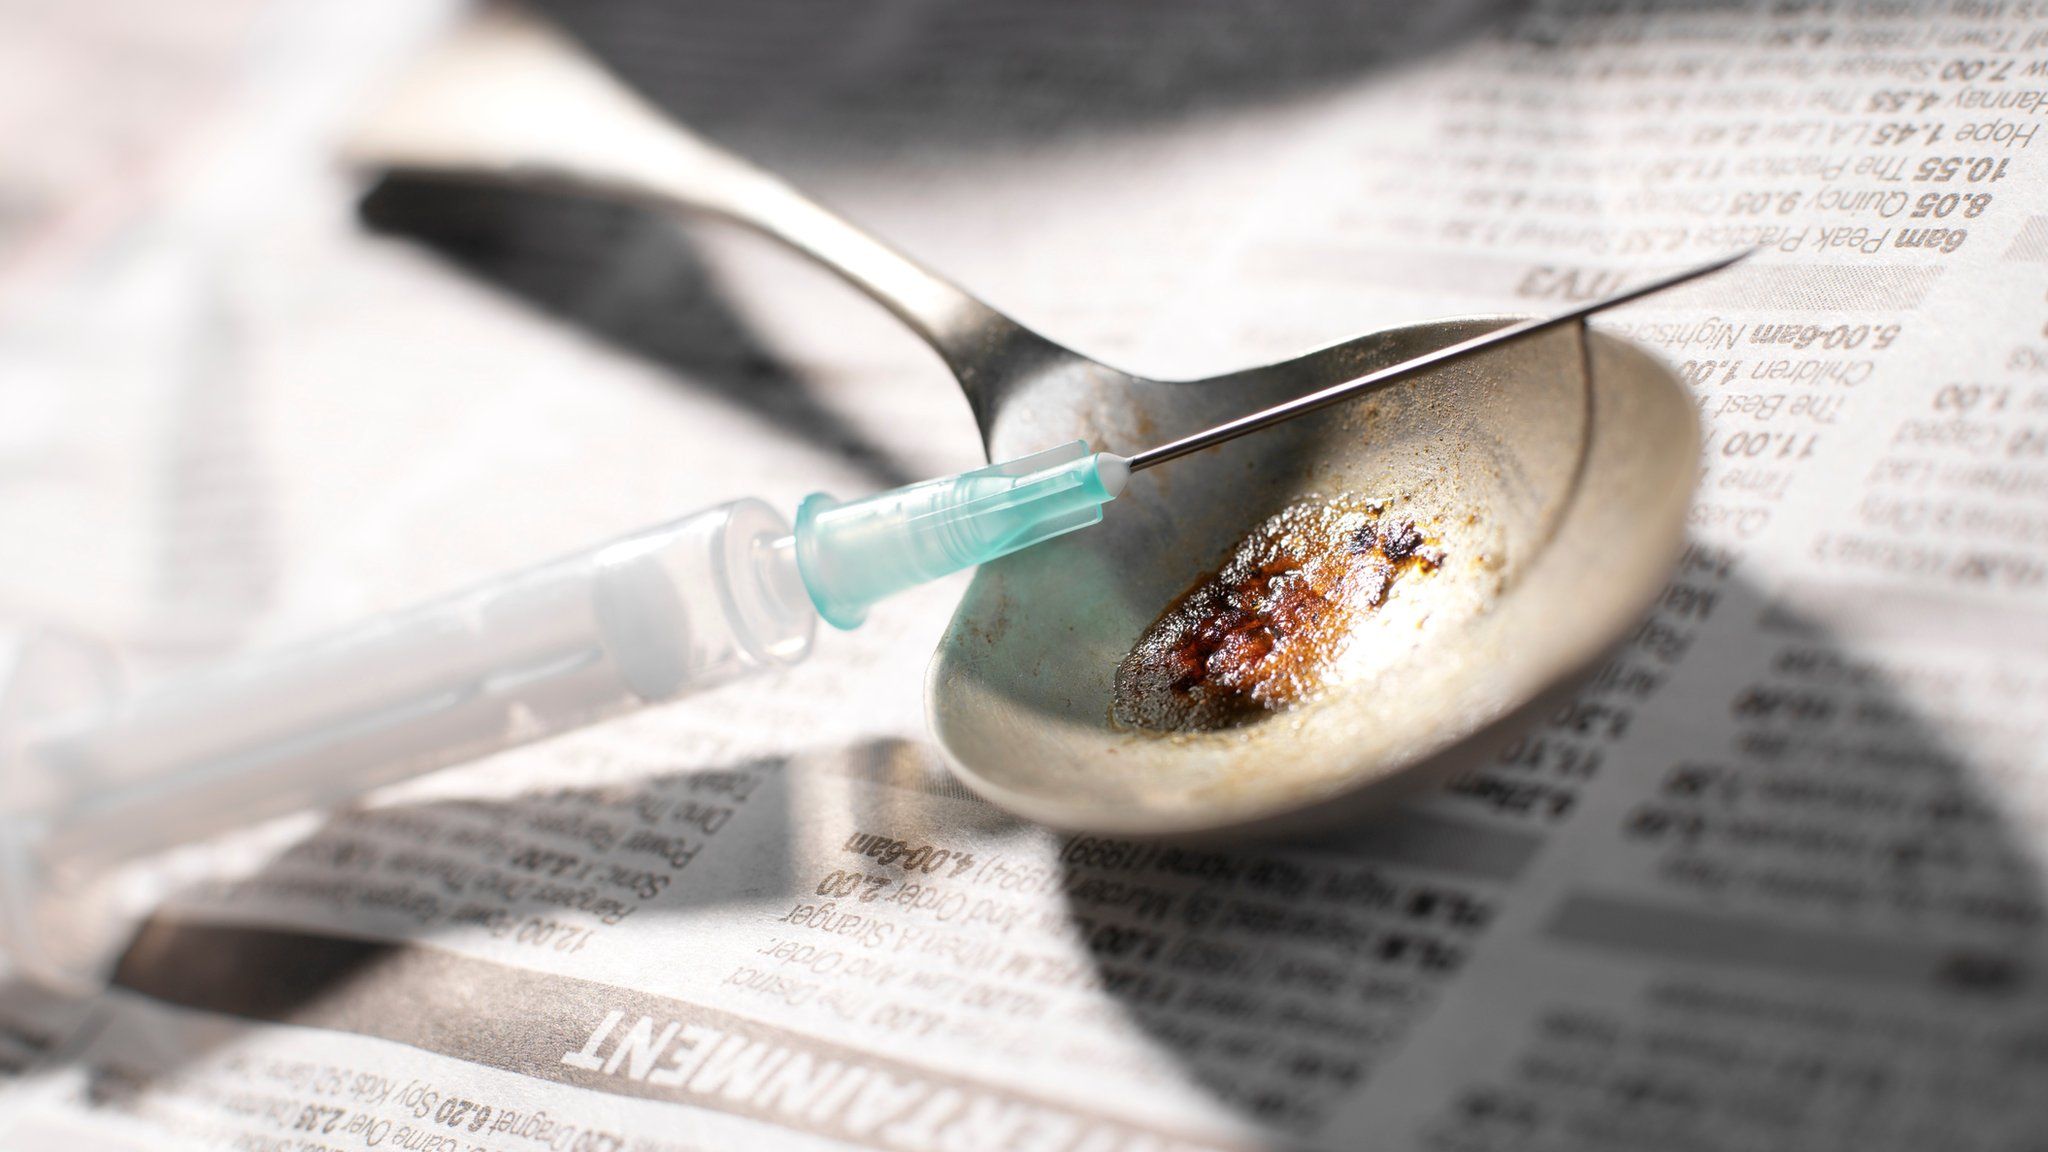 A needle and spoon containing heroin